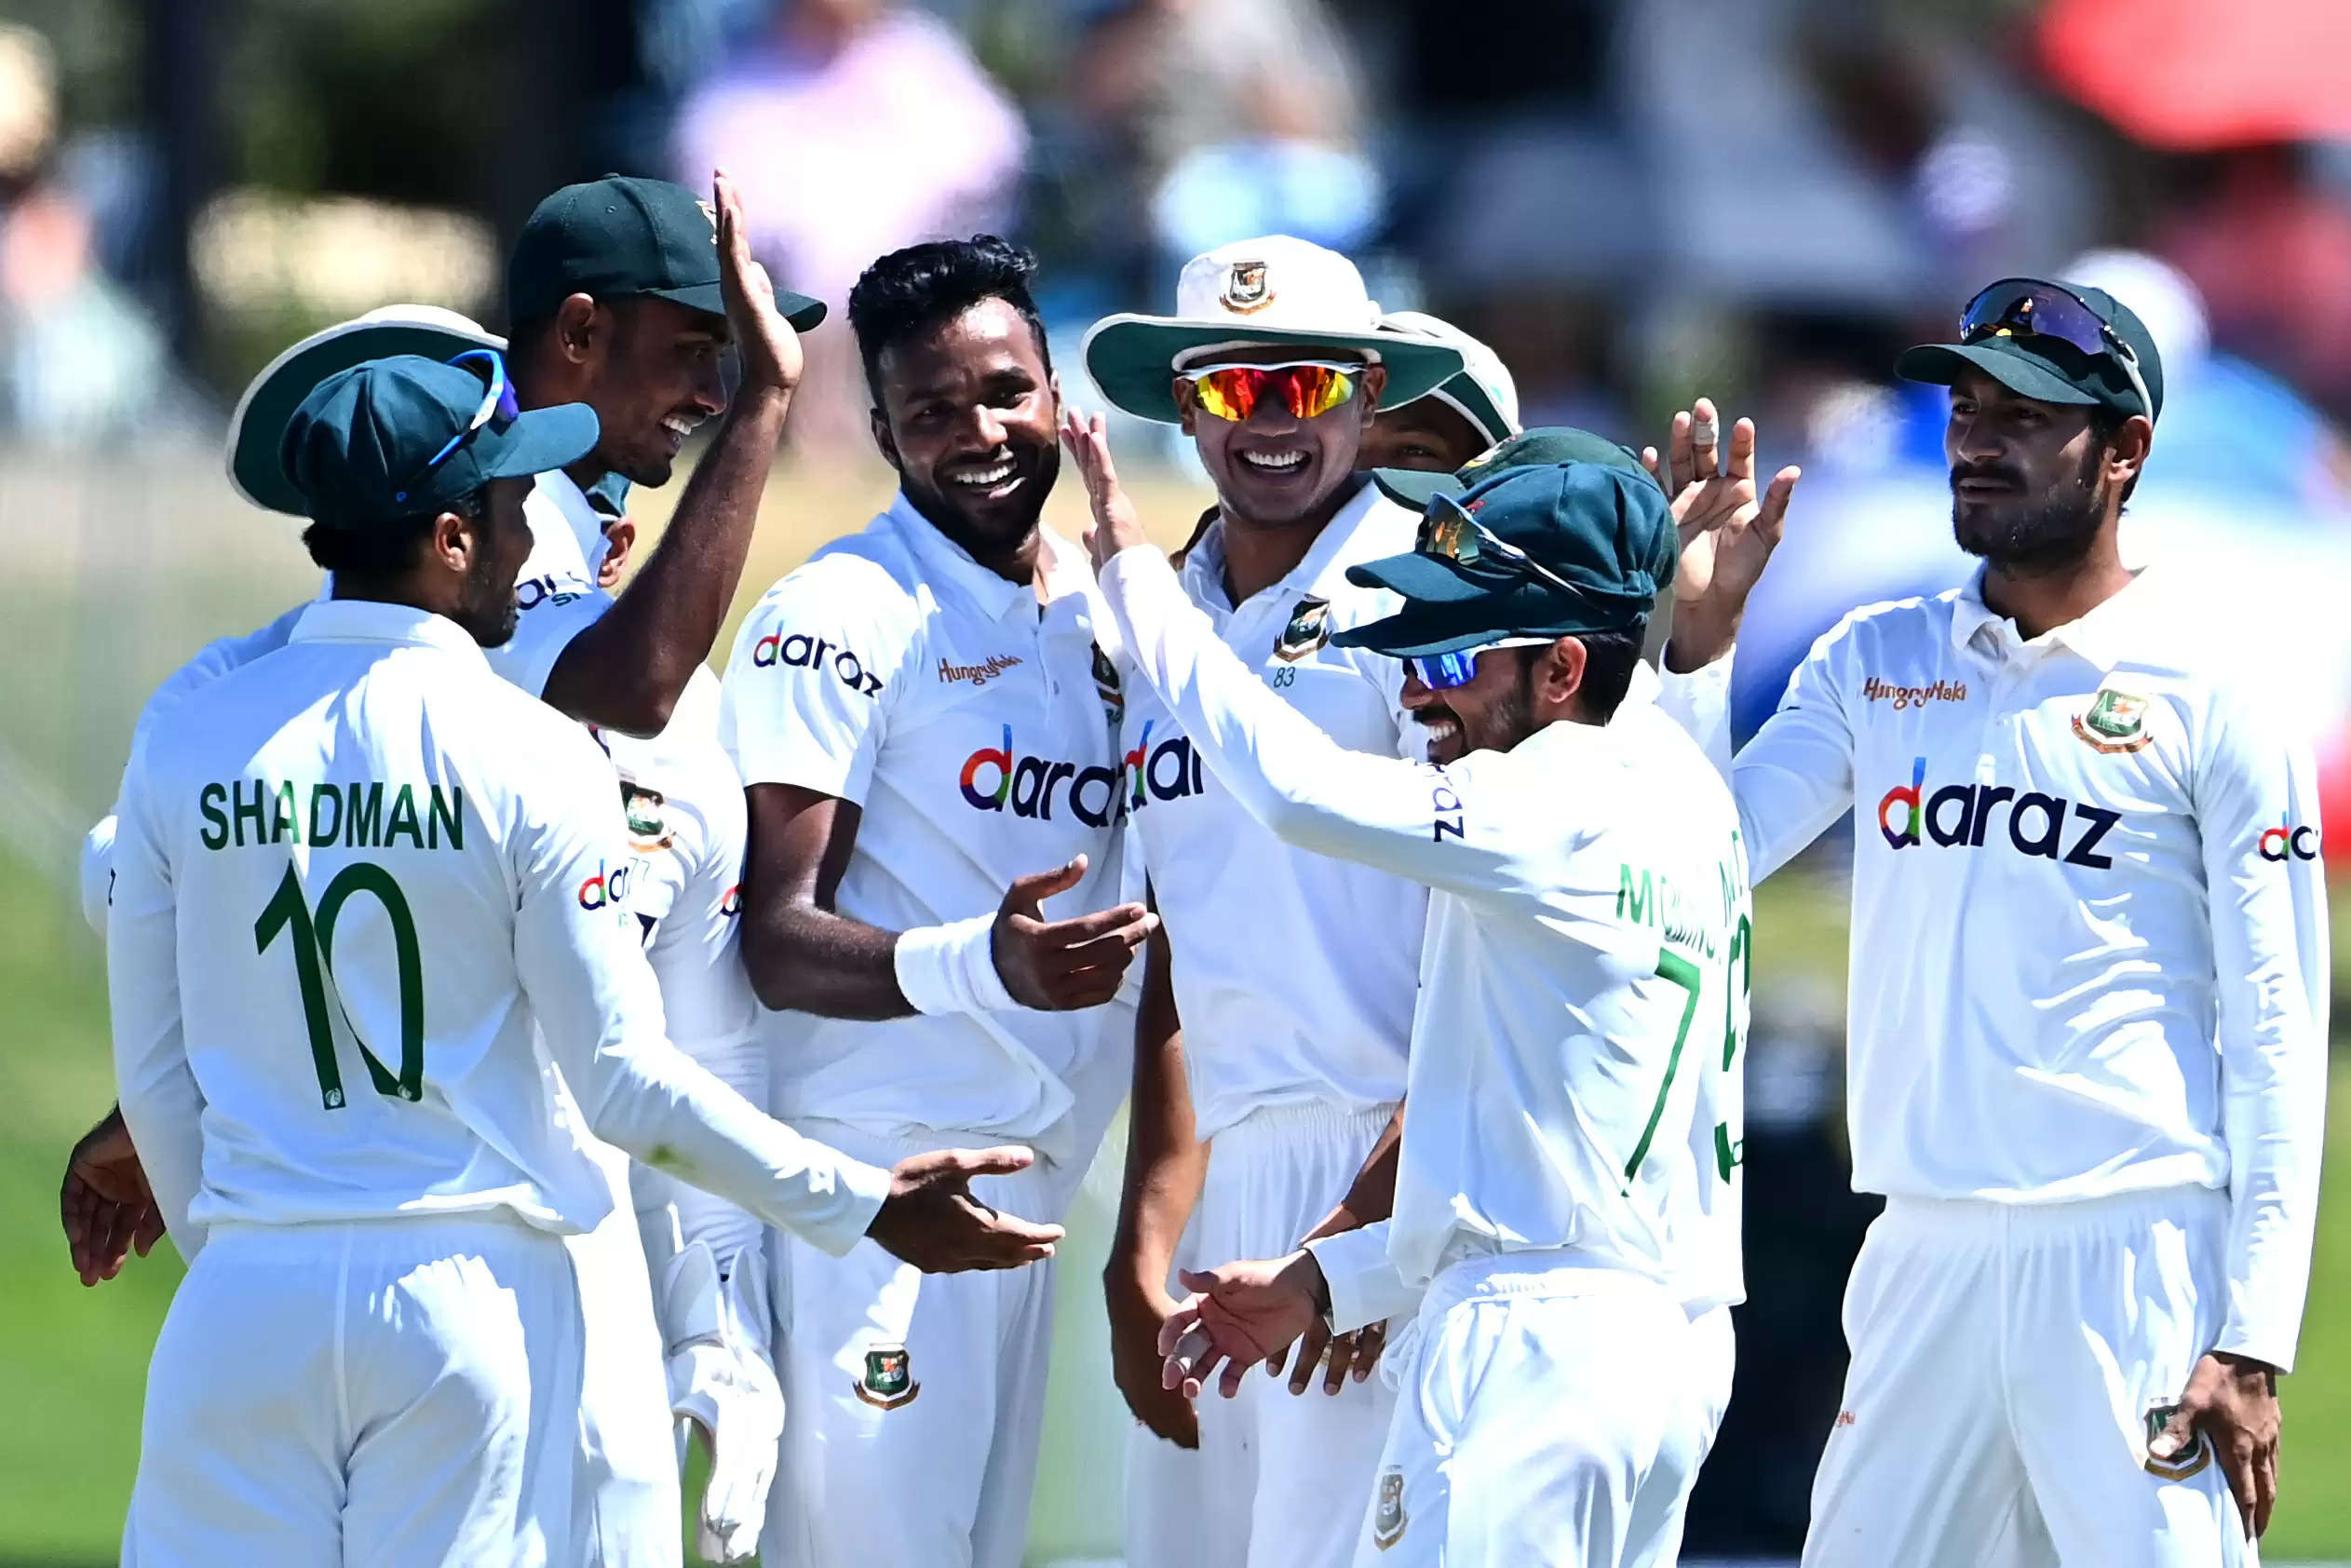 NZ v BAN: Records galore as Bangladesh clinch maiden Test win over New Zealand